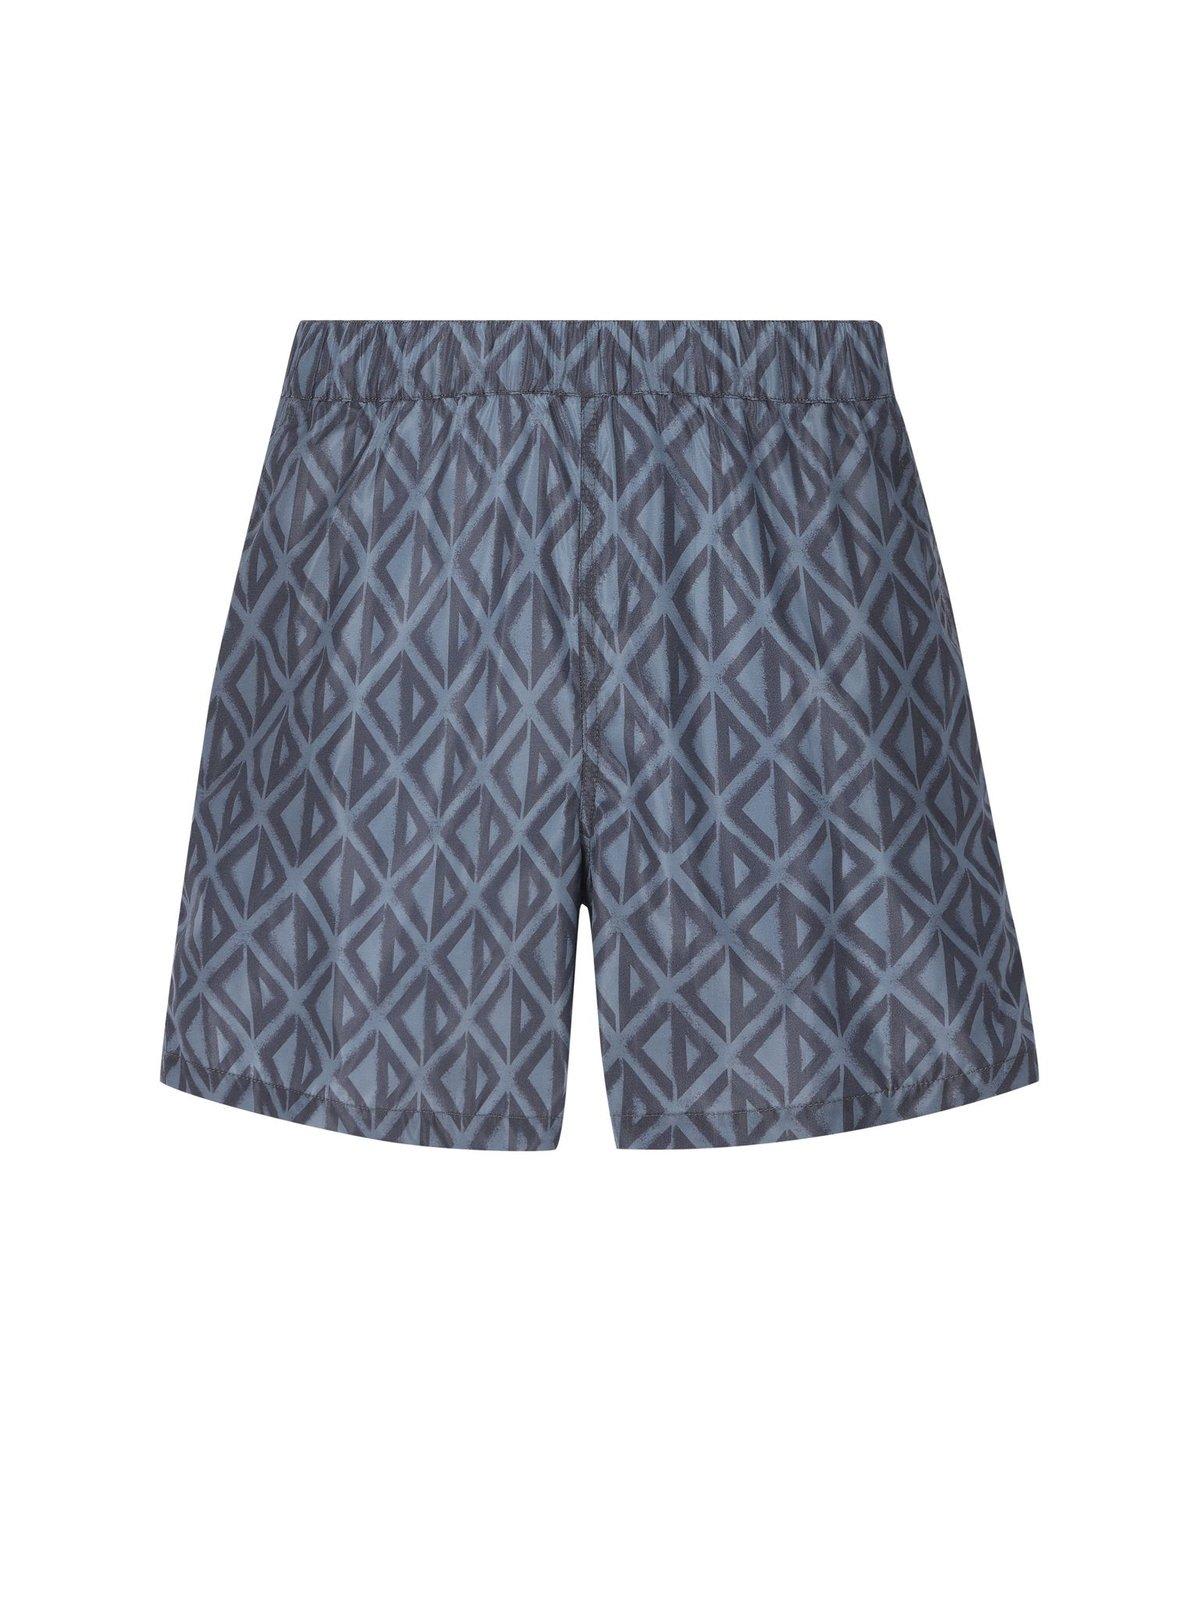 Shop Dior All-over Printed Mid-rise Swim Shorts